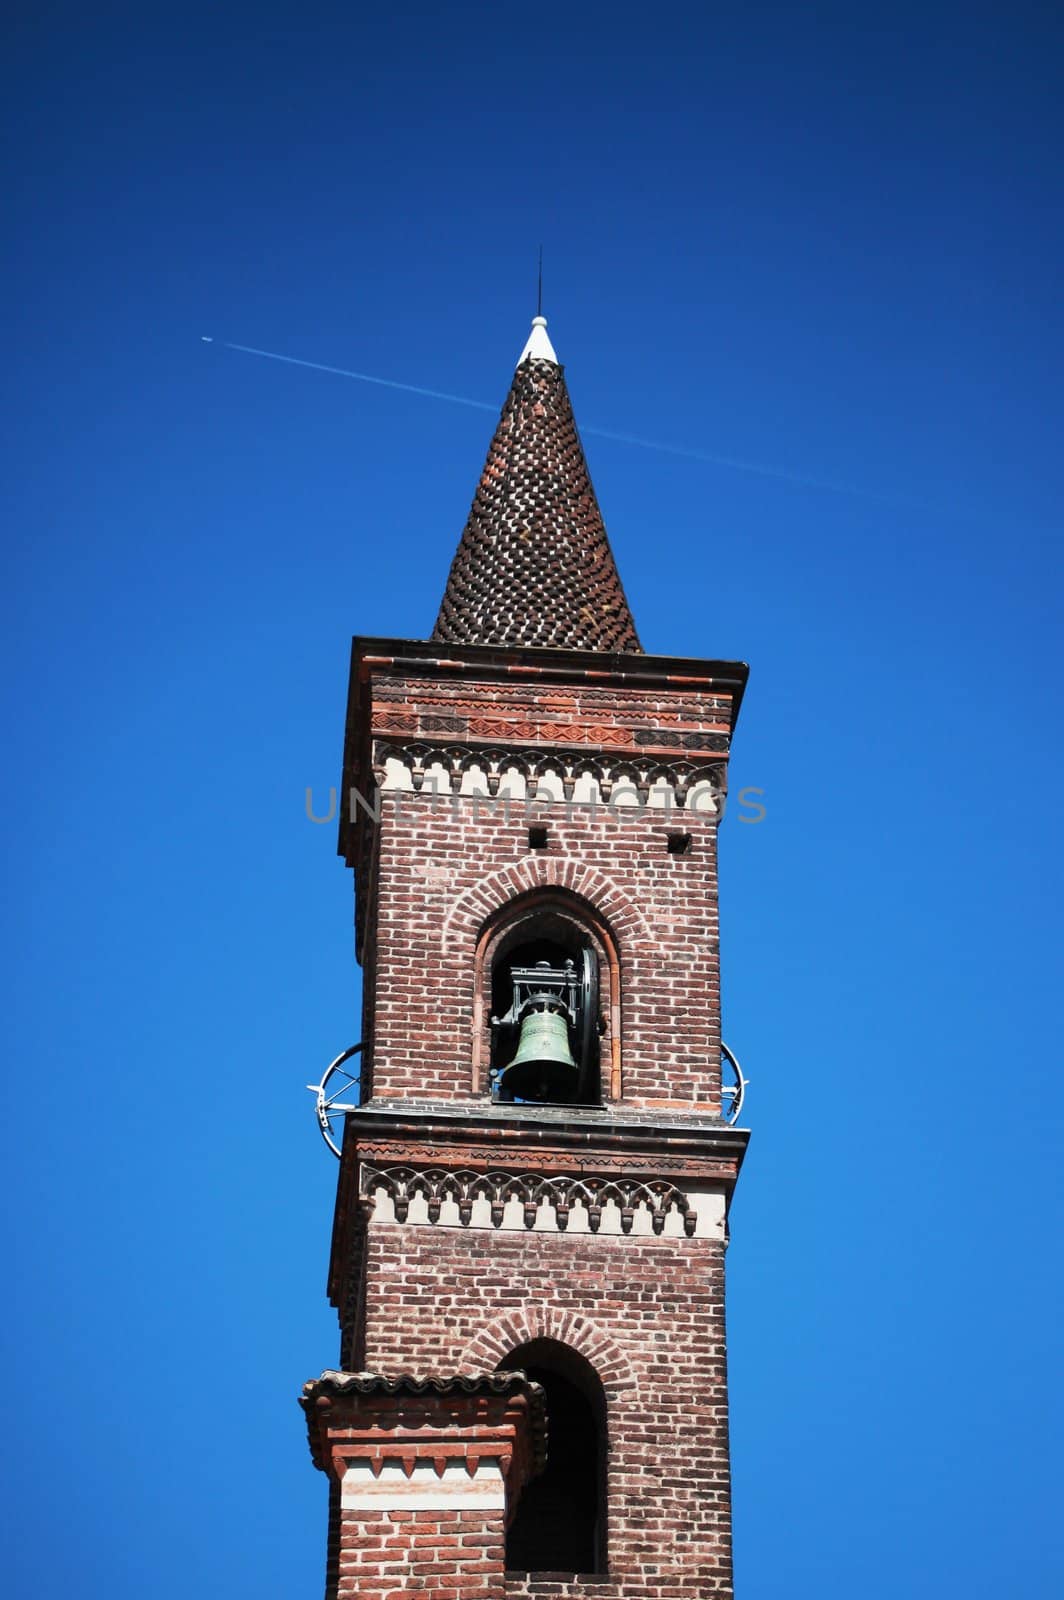 Bell tower on blue sky background